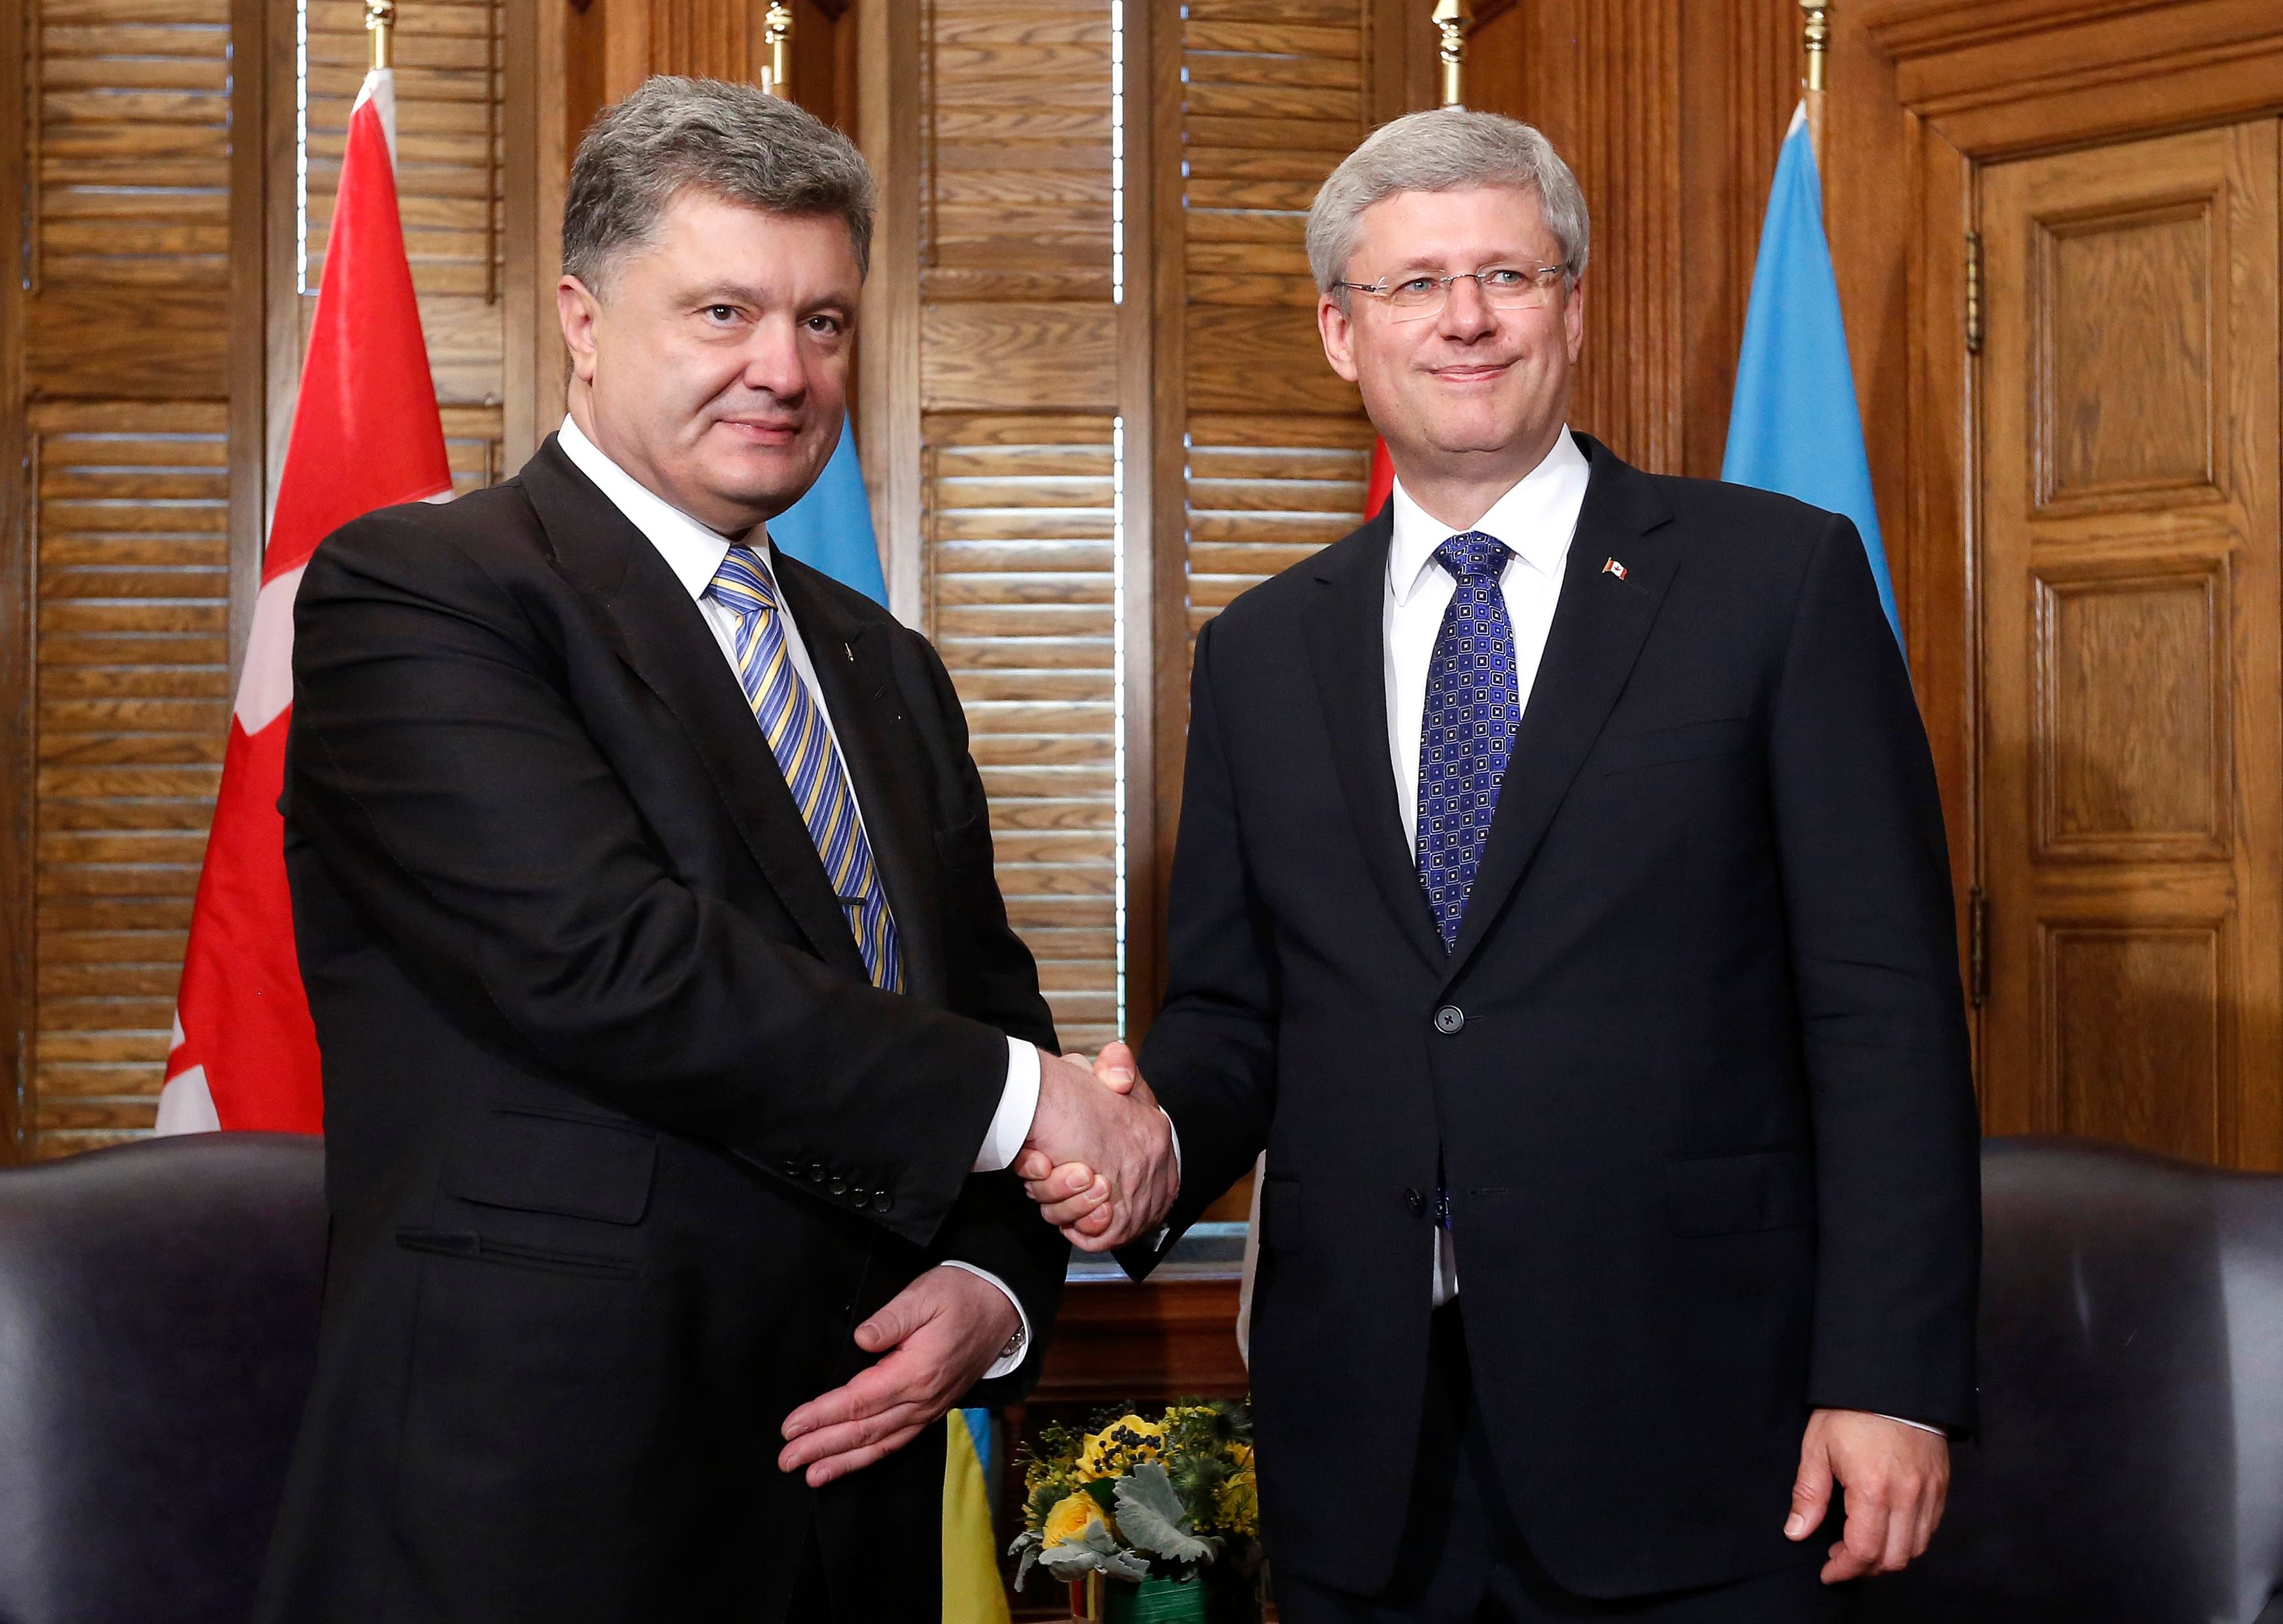 Canada's Prime Minister Stephen Harper (R) shakes hands with Ukraine's President Petro Poroshenko during a meeting in Harper's office on Parliament Hill in Ottawa September 17, 2014. Photo: Reuters